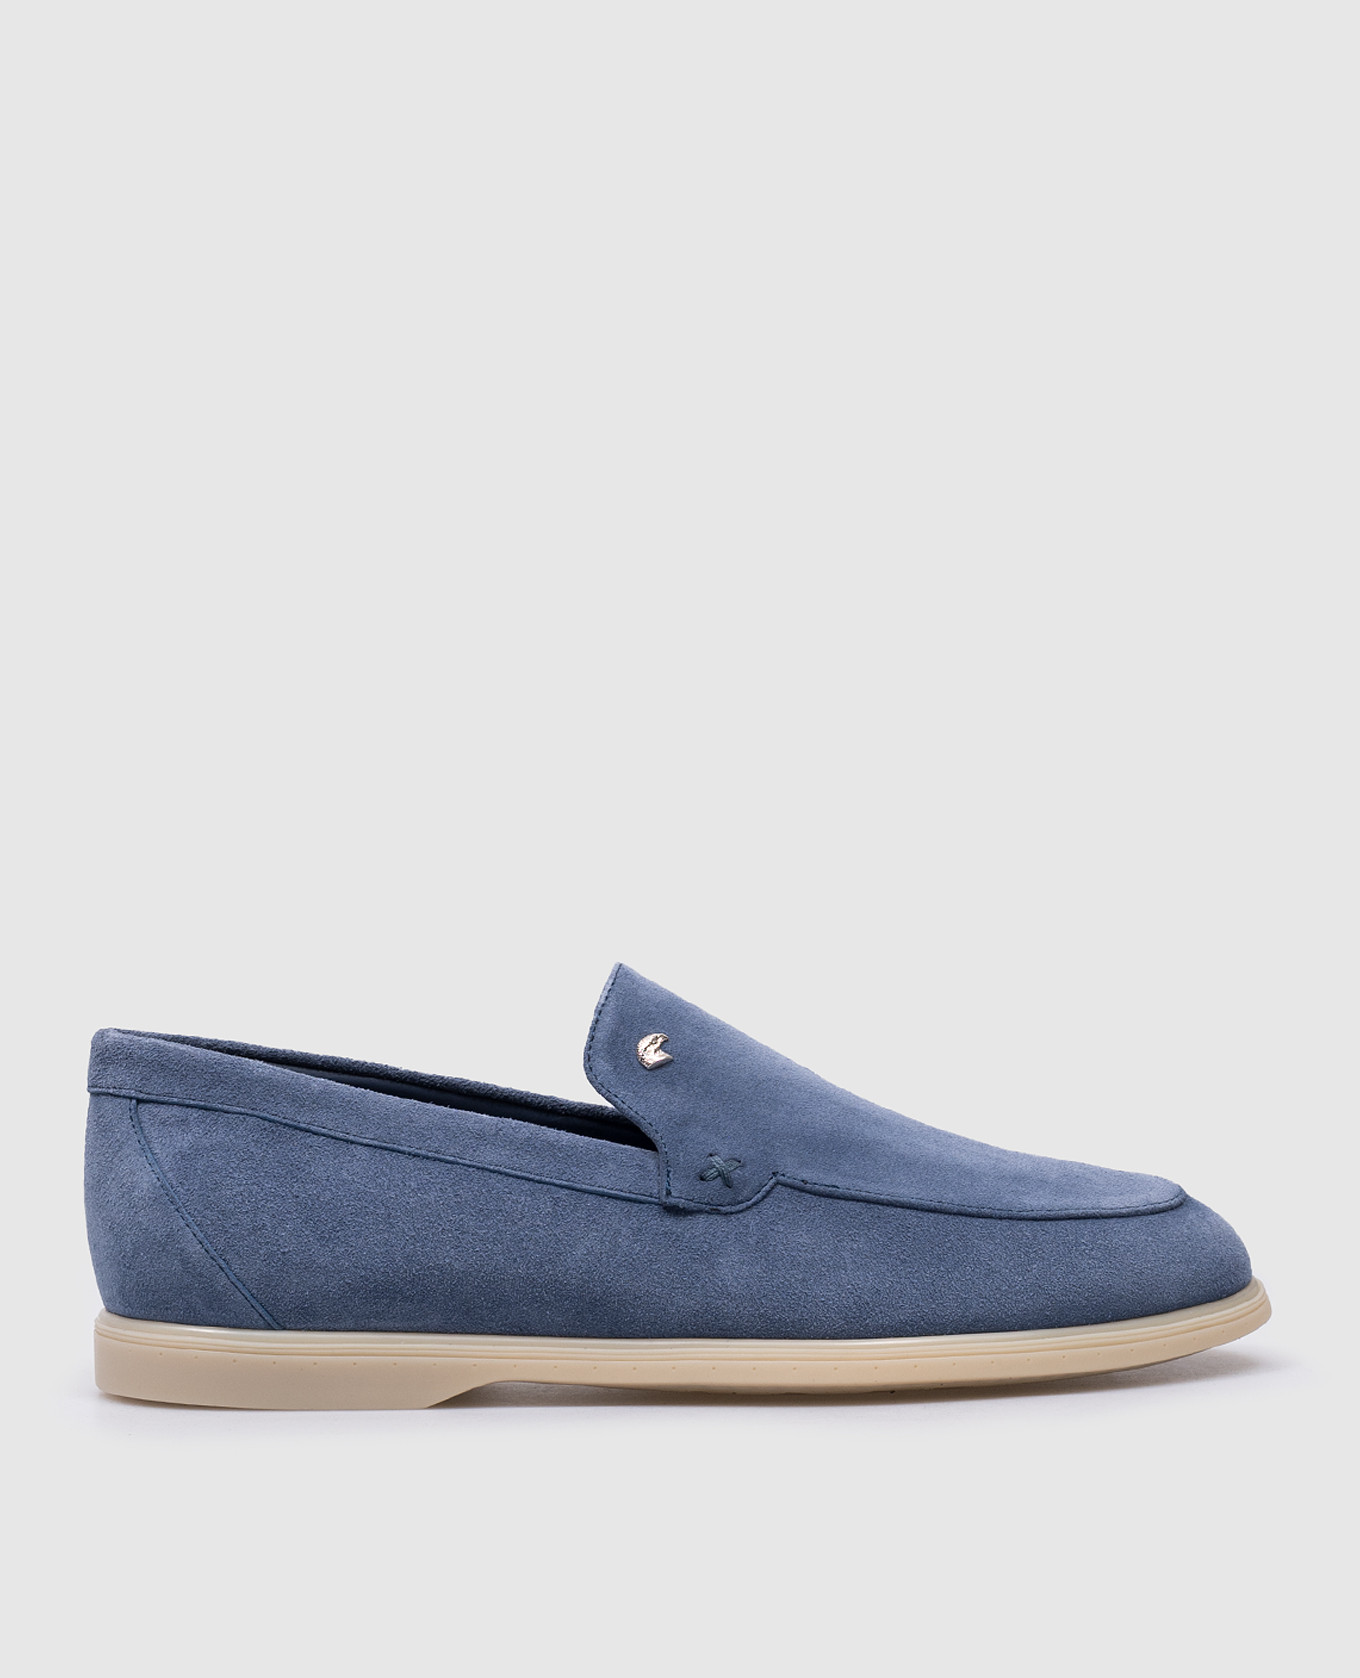 Blue suede loafers with metal logo